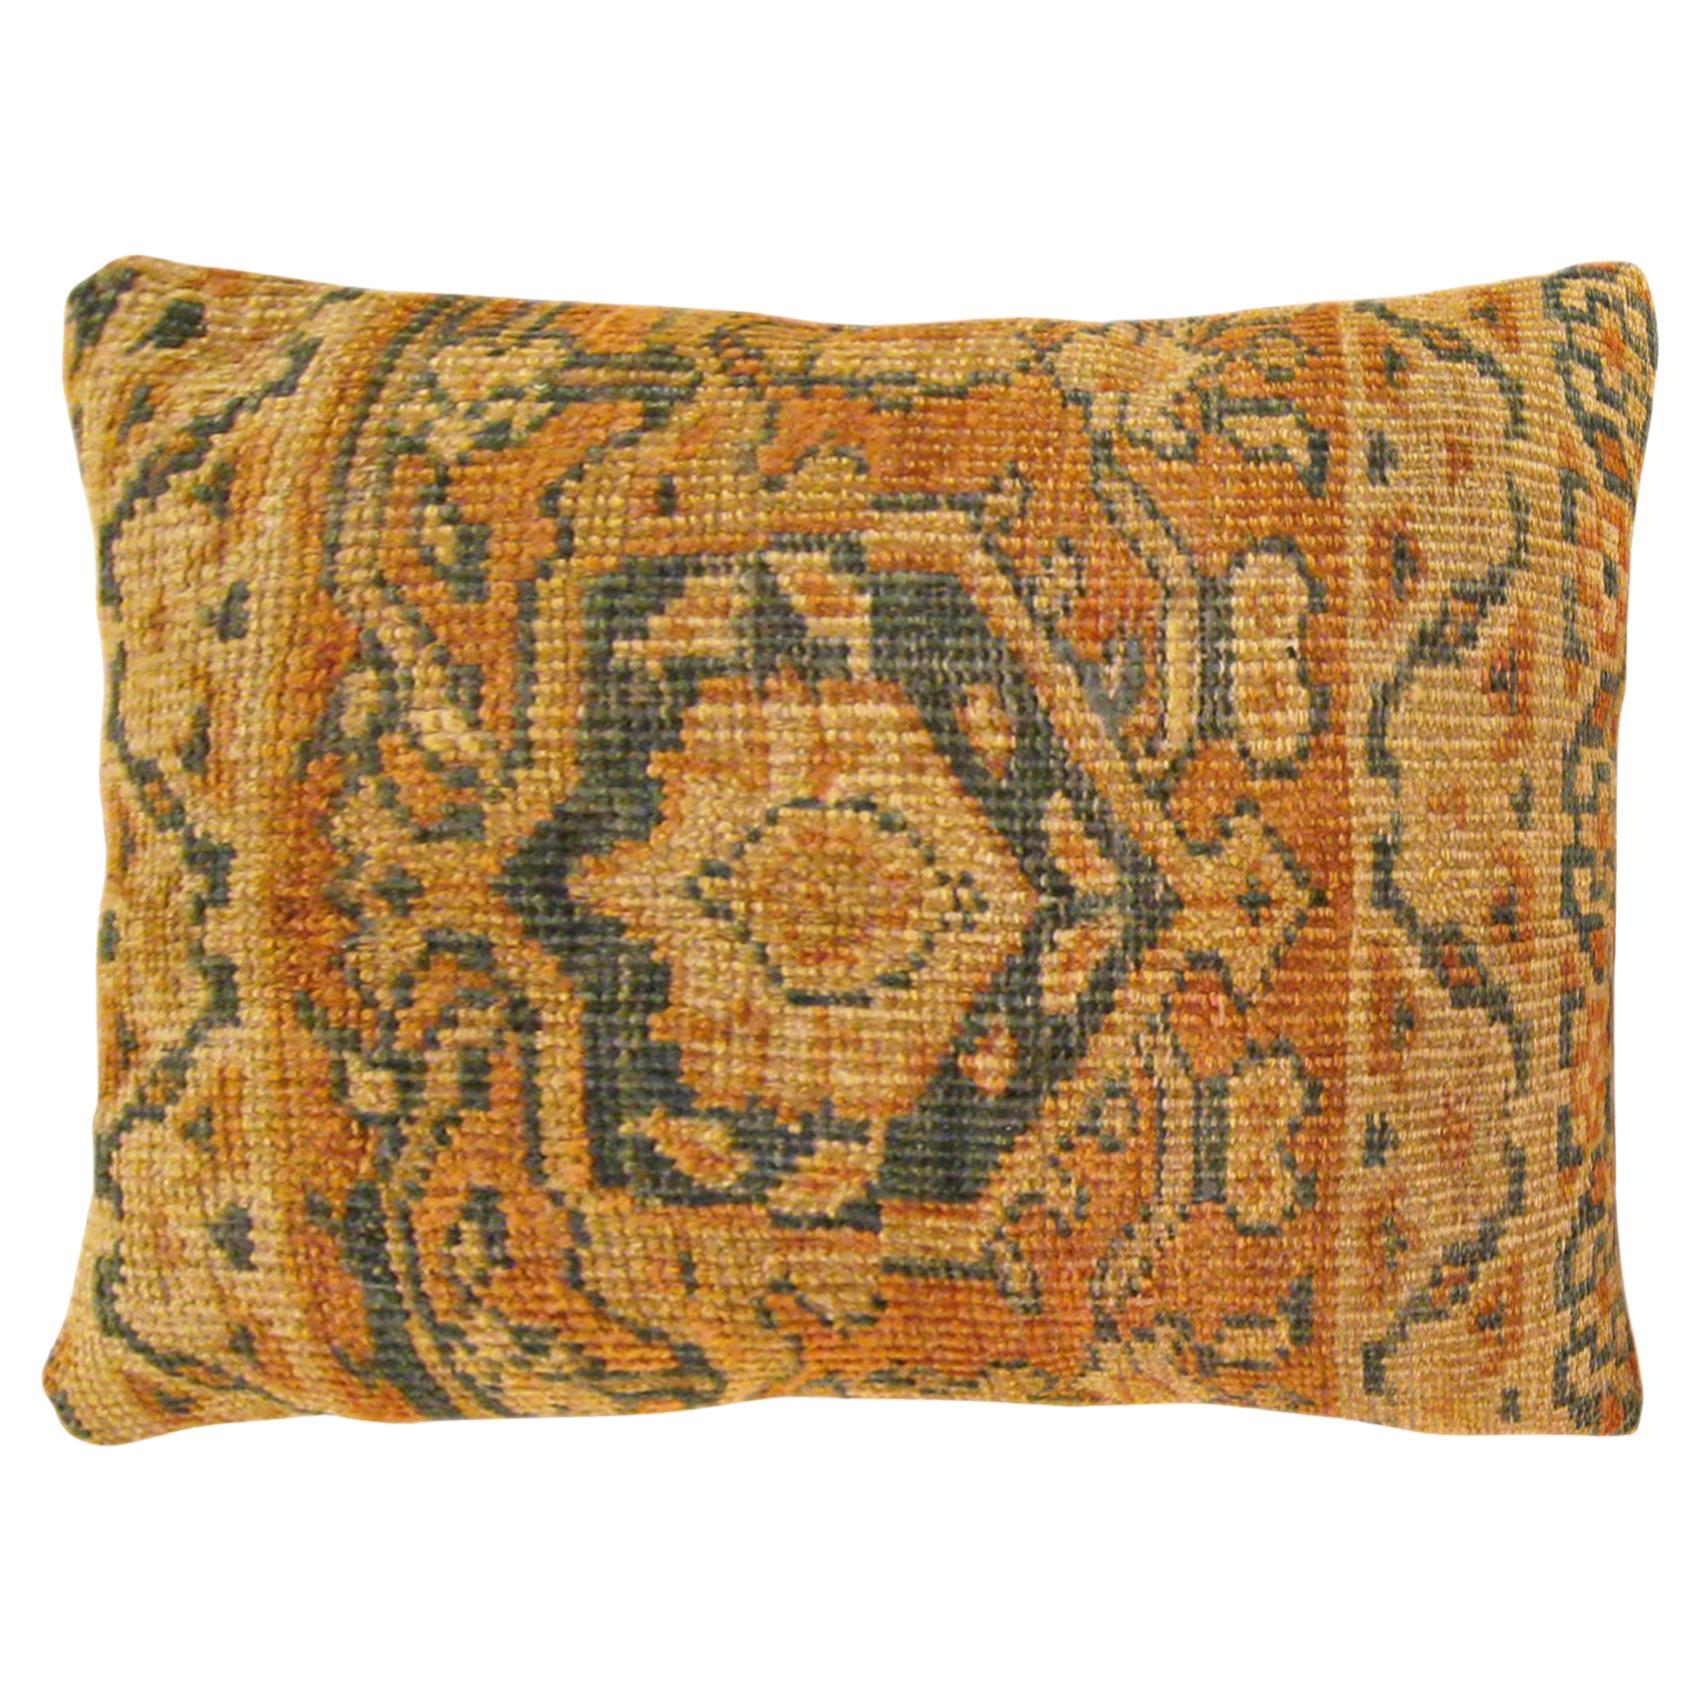 Decorative Antique Persian Sultanabad Pillow with A Central Medallion